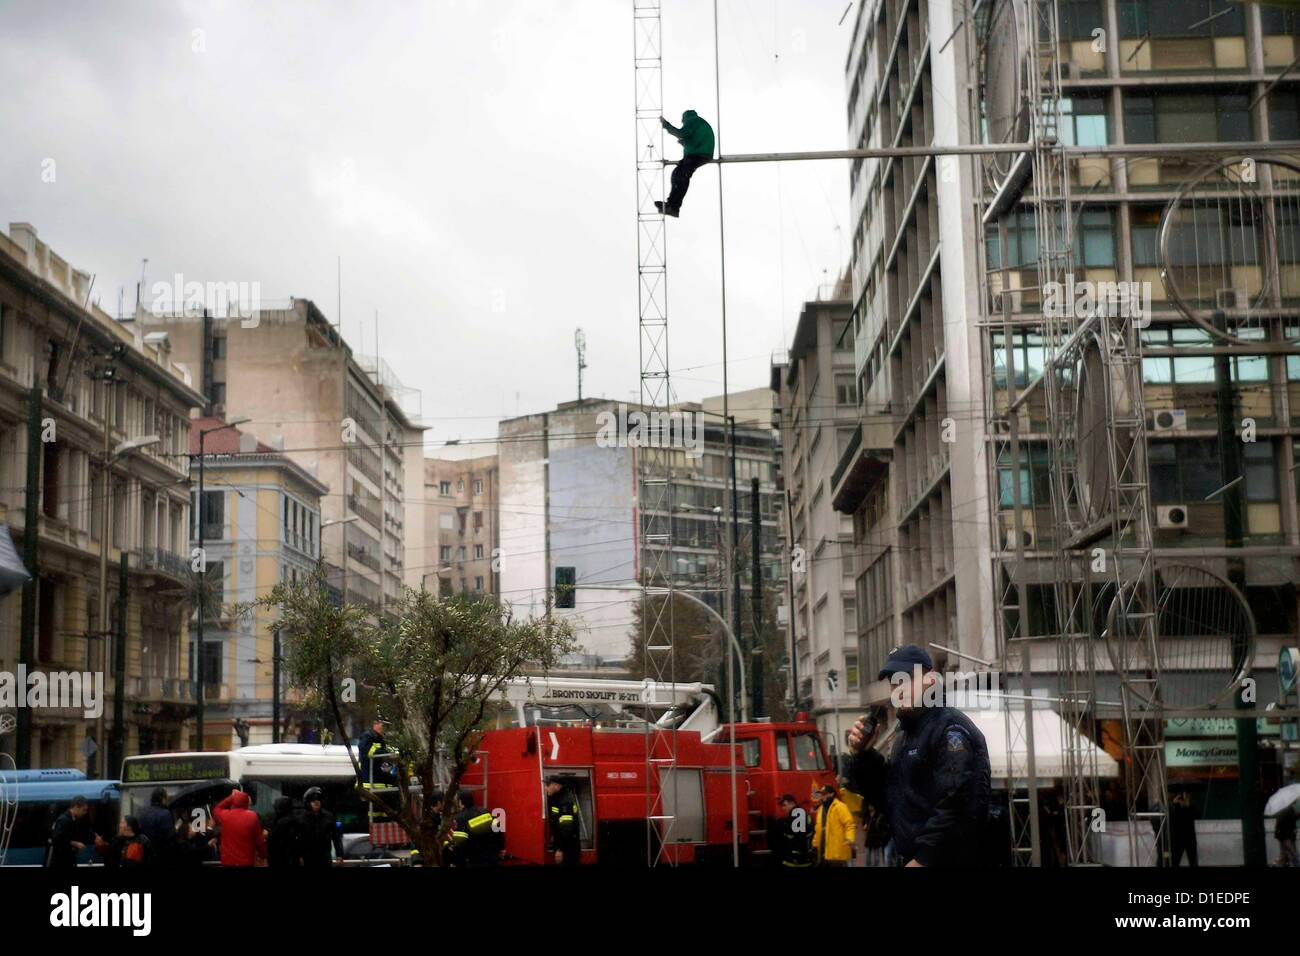 Athens, Greece. 18th December 2012. A deaf-mute mother of 2 children commits a suicide attempt on Omonia Square in Athens, Greece on 18.12.2012, because her financial social support has been shortened. The woman was rescued. Photo: Phasma / Art of Focus Stock Photo